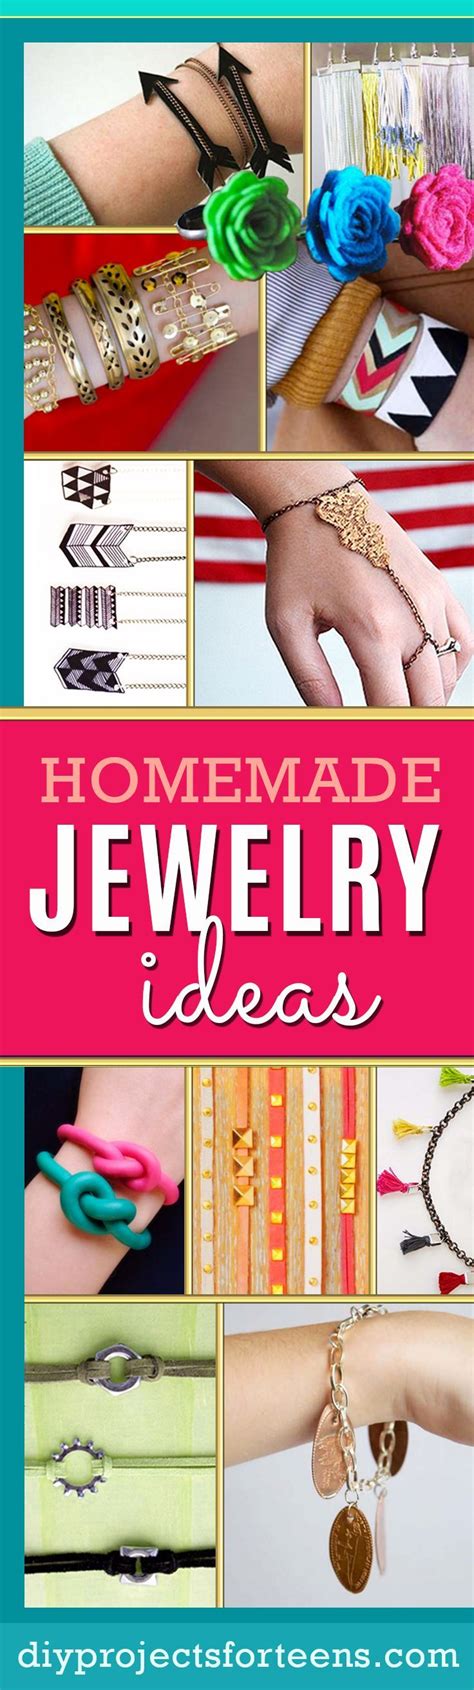 Cool DIY Jewelry Ideas | DIY Bracelets, Necklaces, Earrings and Fun Jewelry Crafts for Adults ...